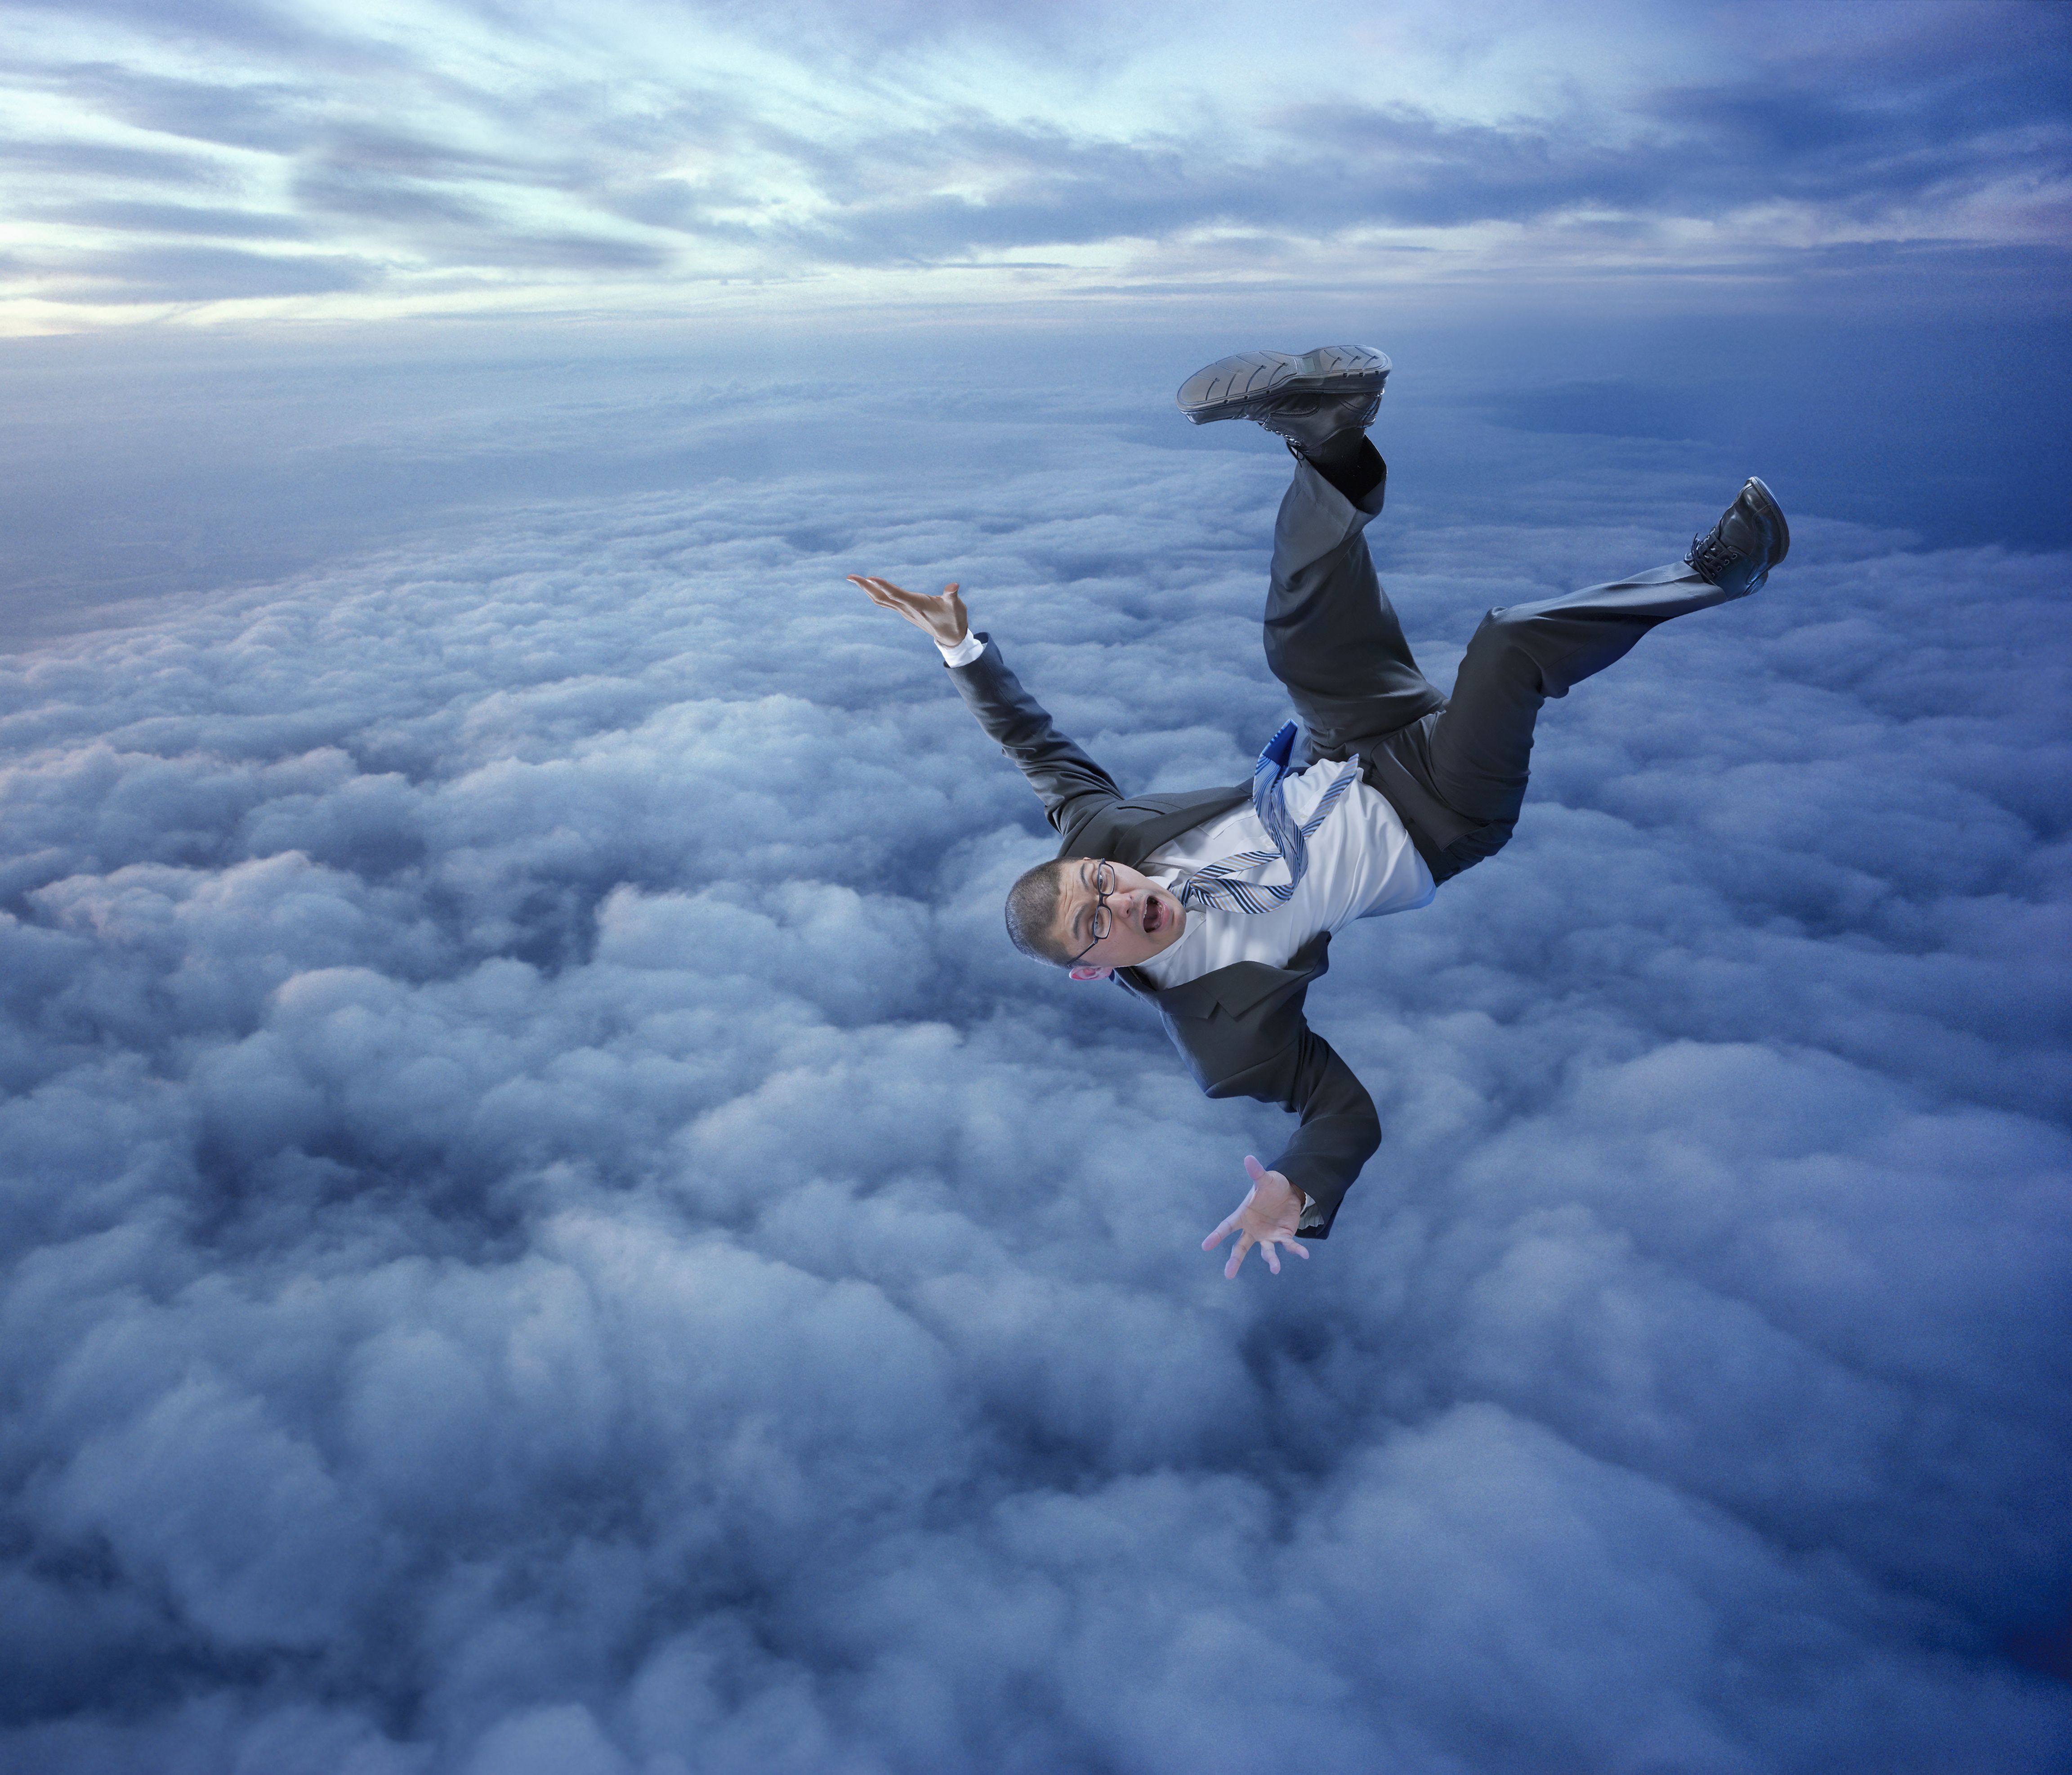 businessman-falling-in-clouds-916188758-0978e1c319be4281ae3165fc24b61122.jpg&f=1&nofb=1&ipt=52ecacf73cda804adeff55566ac6da04938fc45554f34b8e70812add0321d6bc&ipo=images